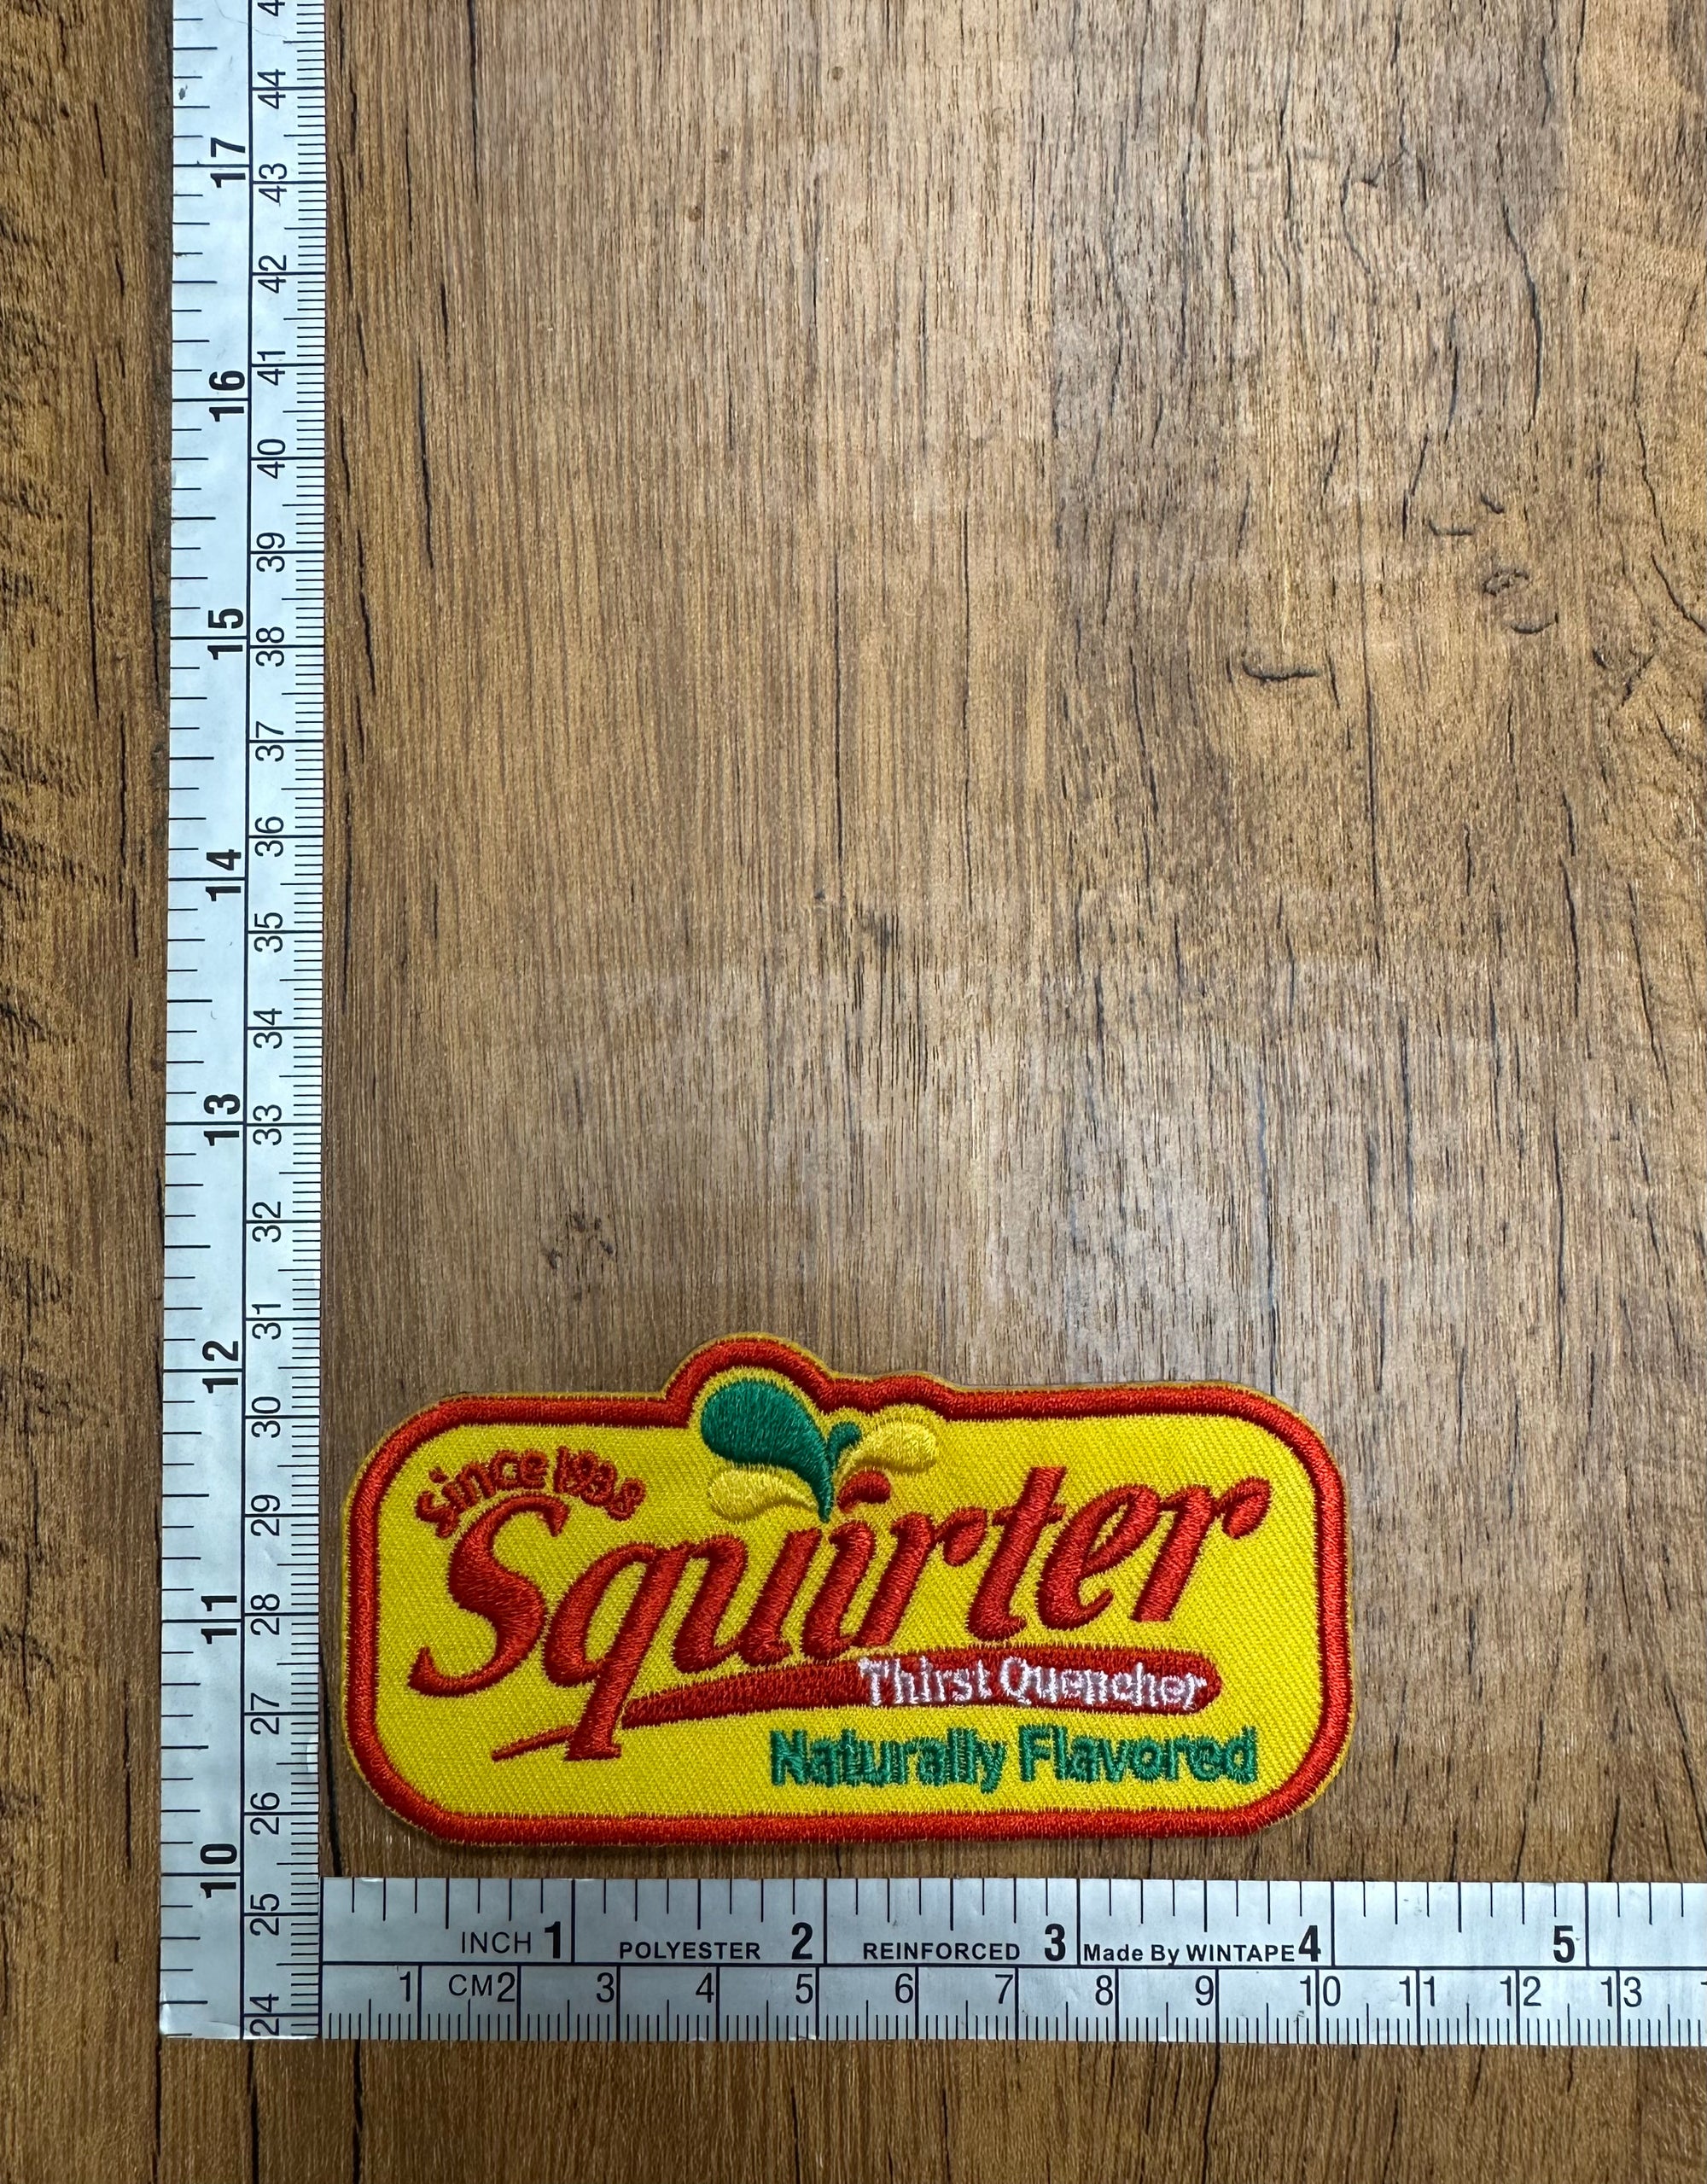 Since 1988 Squirter Naturally Flavored